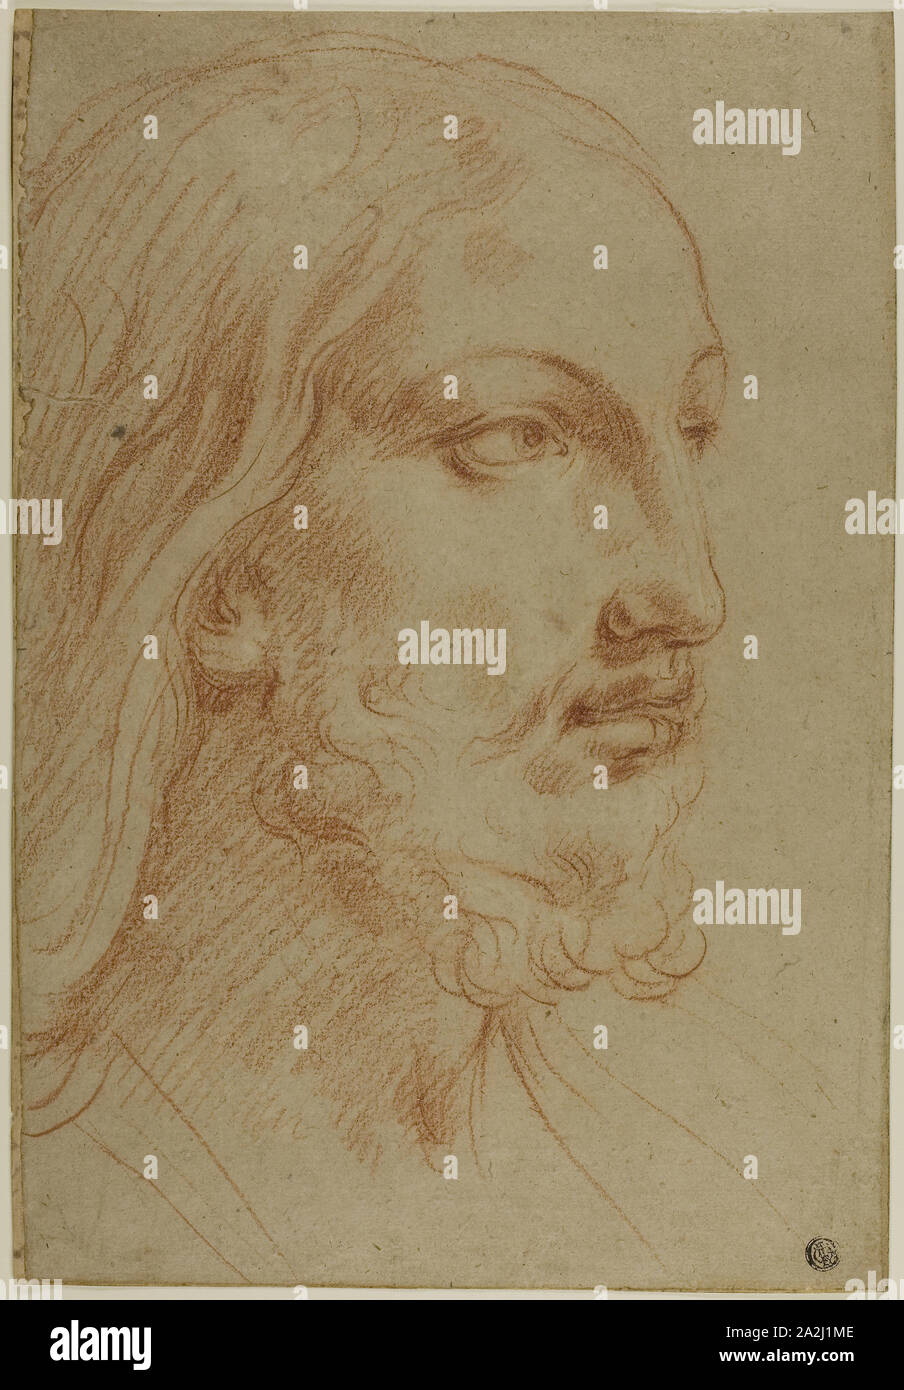 Head of Christ, c. 1652, Giovanni Andrea Sirani, Italian, 1610-1670, Italy, Red chalk on tan laid paper, laid down on cream laid paper, 367 x 253 mm, Plum Garden at Kameido (Kameido Umeyashiki), from the series One Hundred Famous Views of Edo (Meisho Edo hyakkei), 1857, Utagawa Hiroshige 歌川 広重, Japanese, 1797–1858, Japan, Color woodblock print, oban, 36 x 24.1 cm (14 3/16 x 9 1/2 in Stock Photo